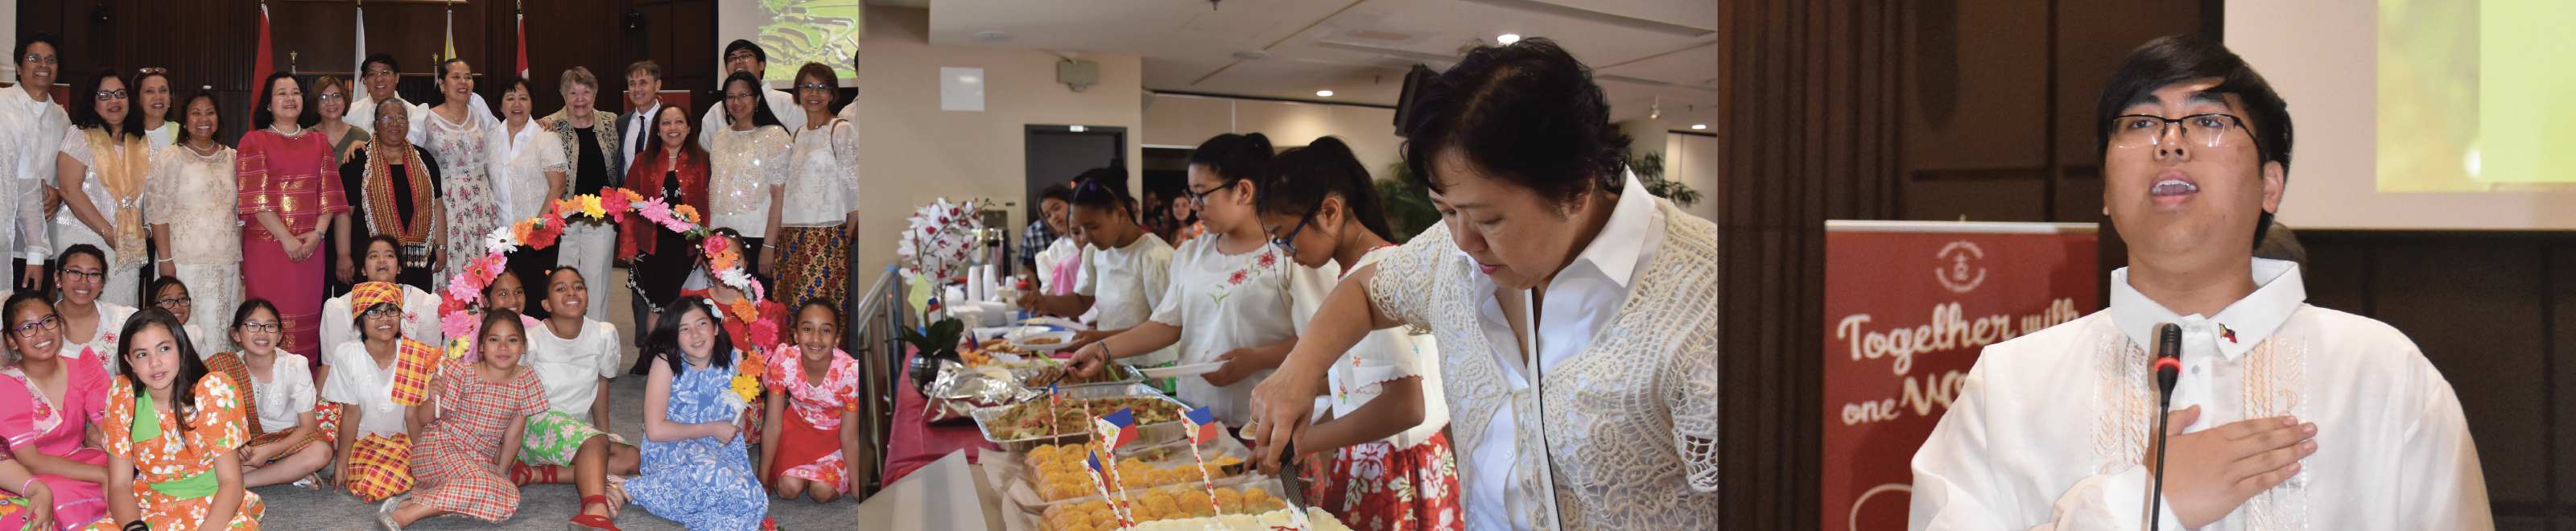 First photo is of students dressed up in traditional Filipino dress for the Filipino Cultural Heritage Month Mass and Expose. Second photo is of students, staff and parents picking traditional Filipino food to eat from the buffet spread. Third photo is a of a student reciting a prayer at the podium. 